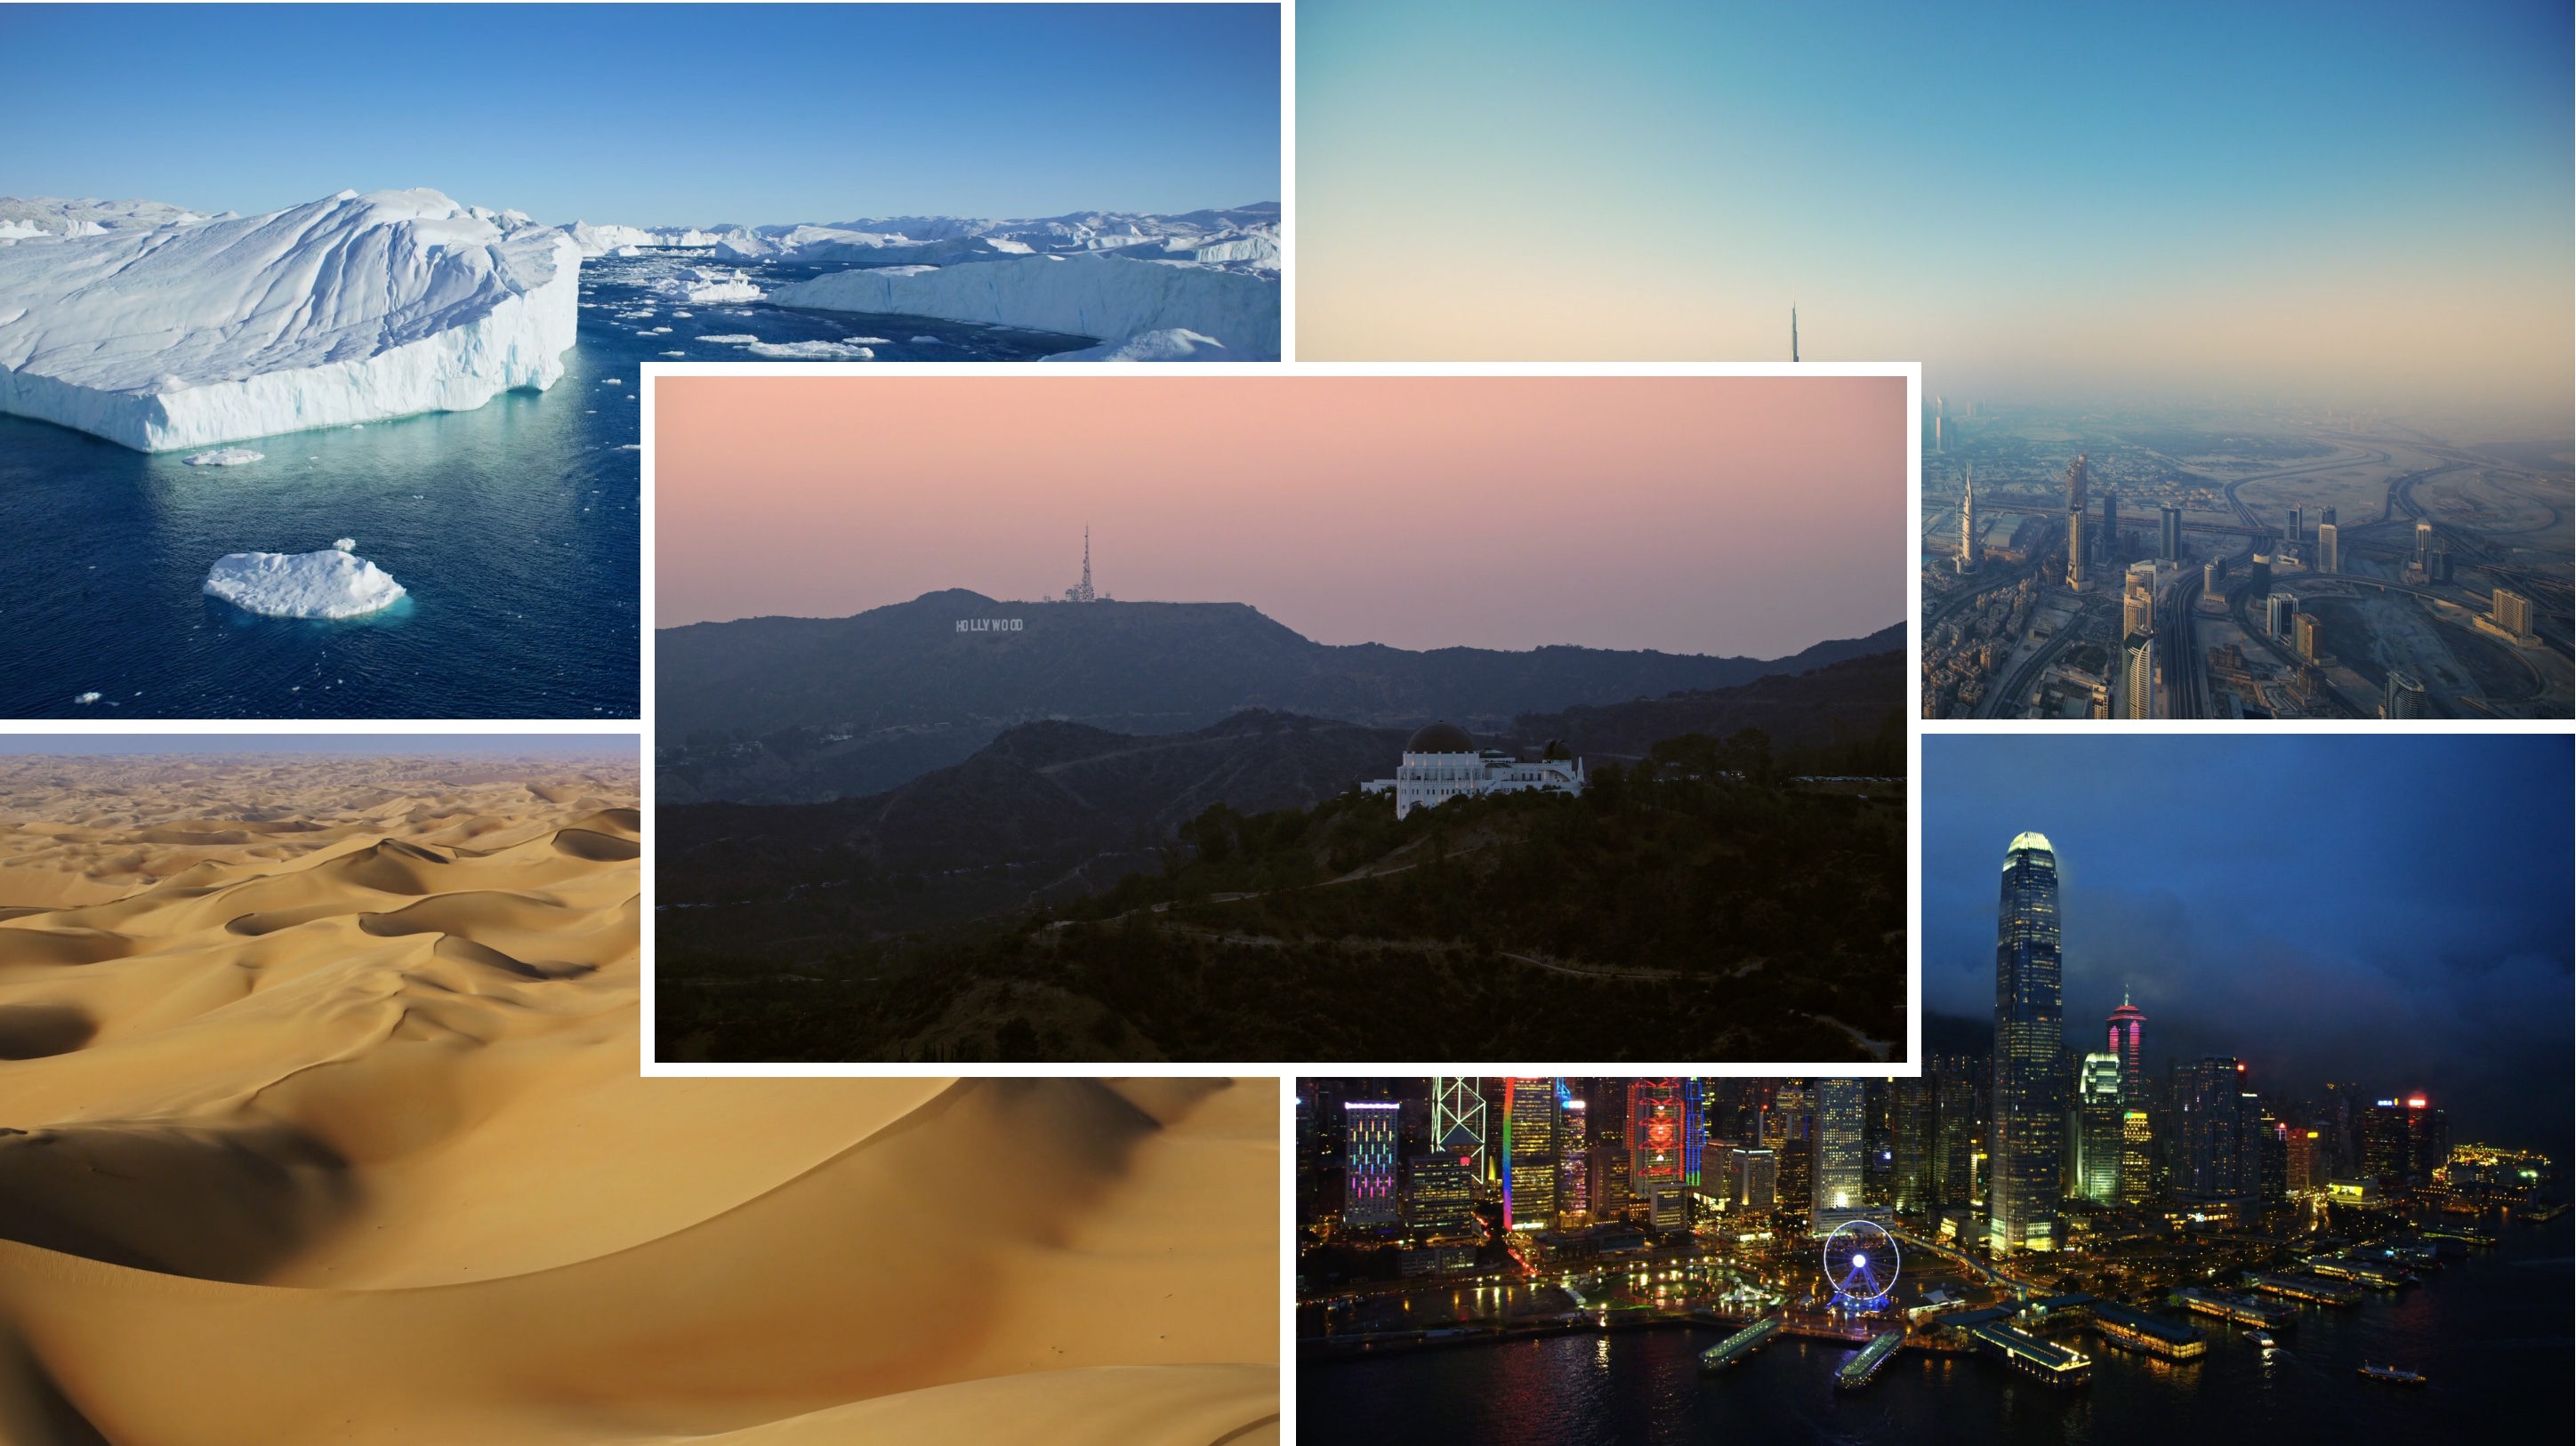 Apple TV's gorgeous Aerial screen saver gains 21 new videos, watch them